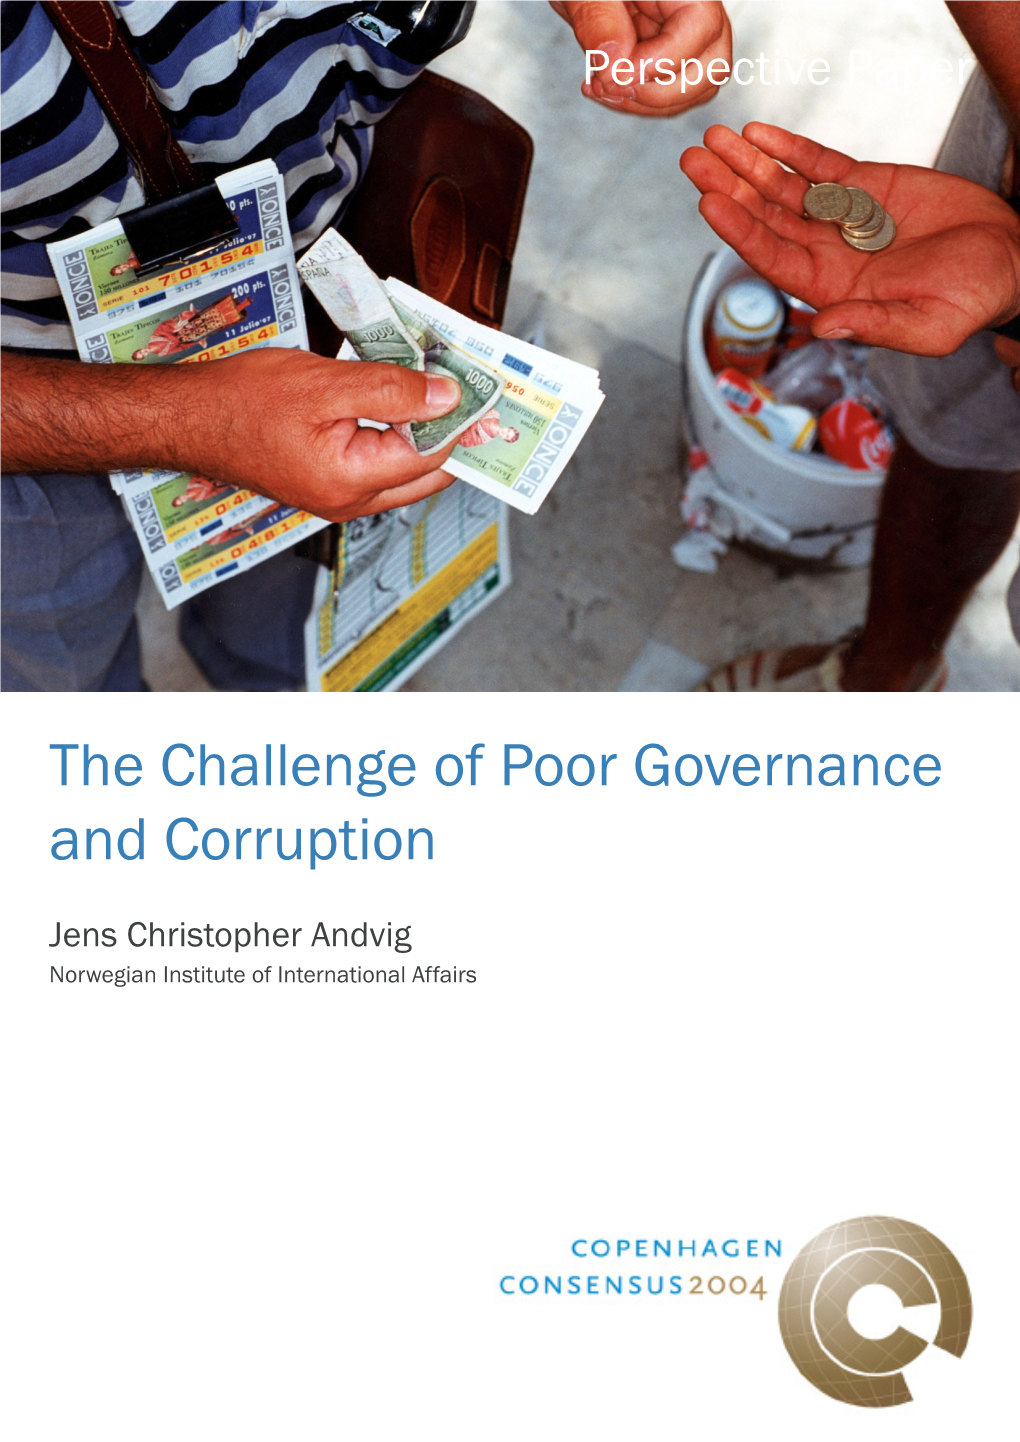 The Challenge of Poor Governance and Corruption